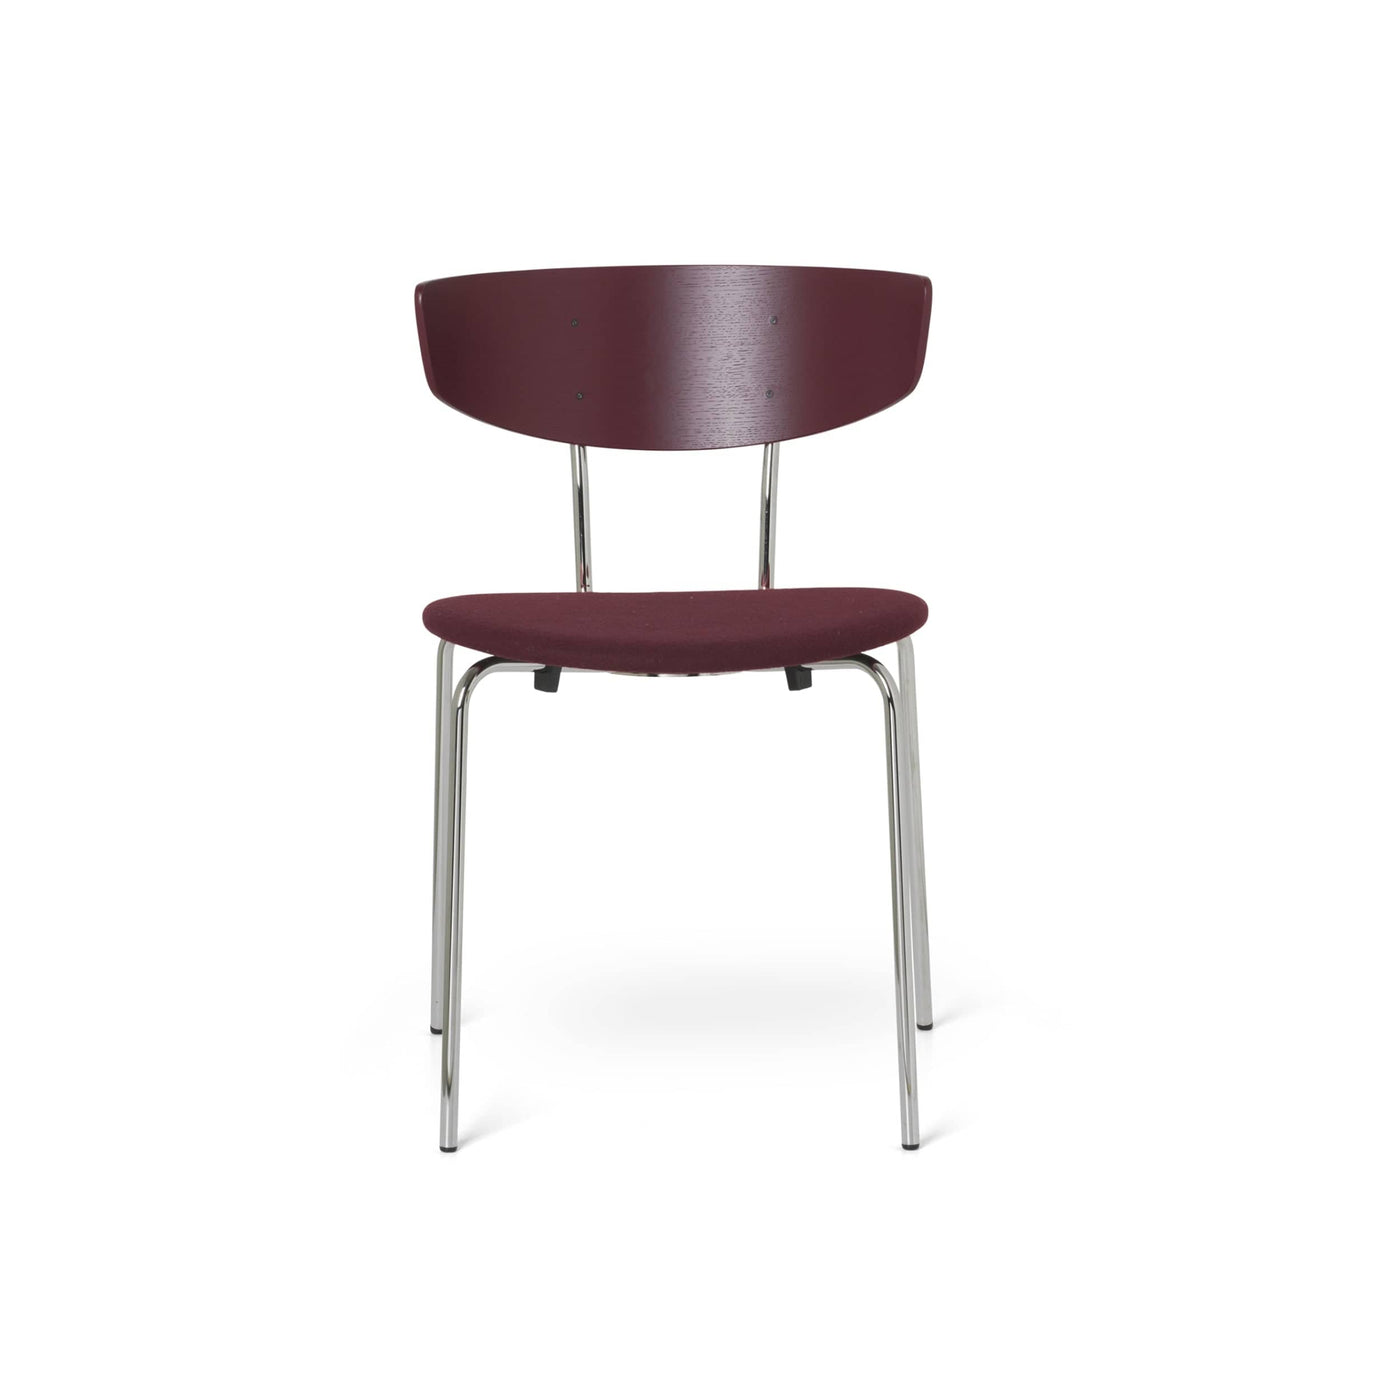 Ferm living herman chair with chrome legs. Available from someday designs. #colour_red-brown